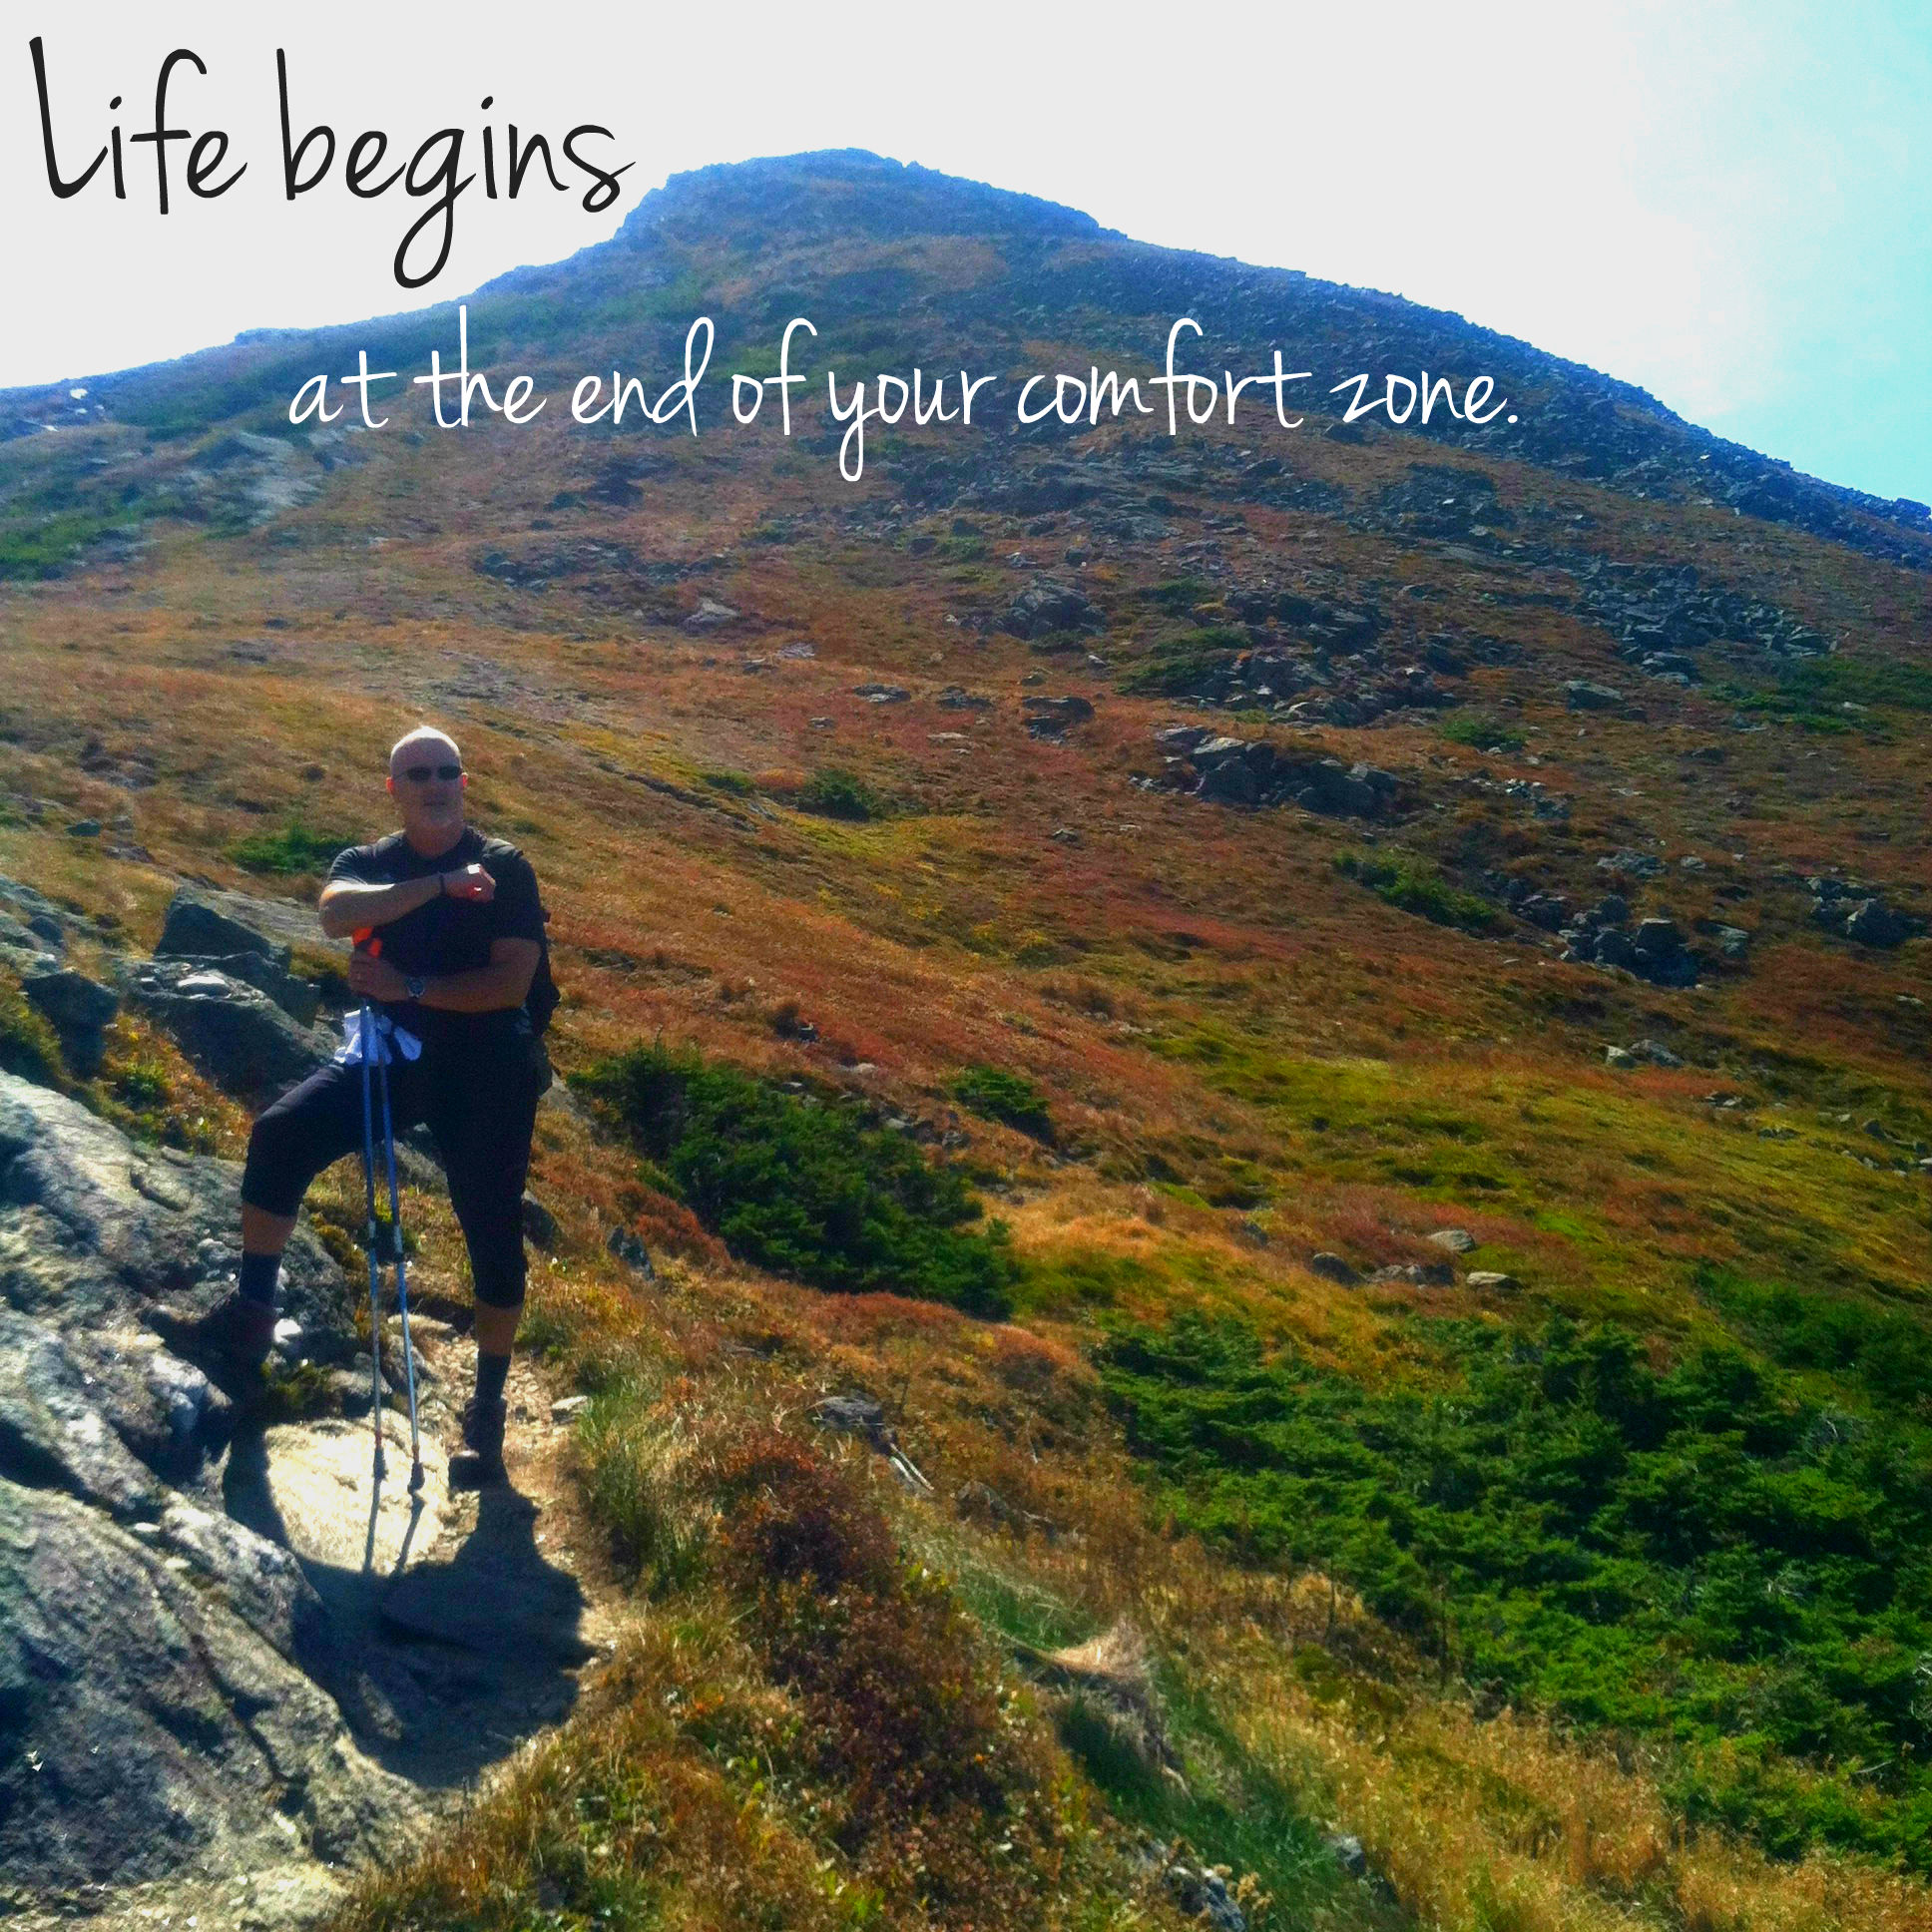 Life begins at the end of your comfort zone. - Create. Nourish. Love.